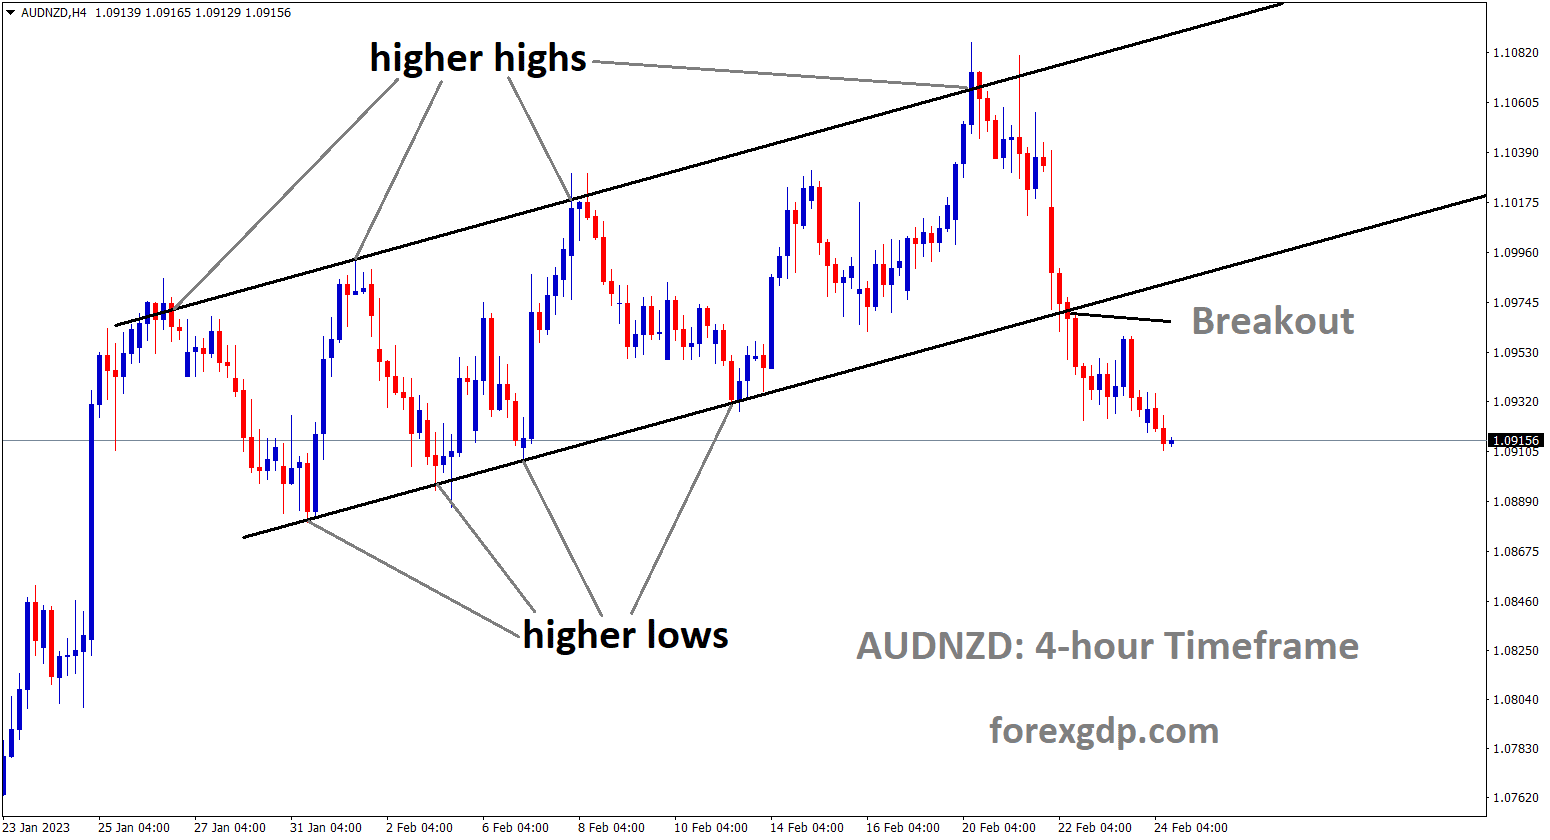 AUDNZD has broken the higher low area of the Ascending Channel.